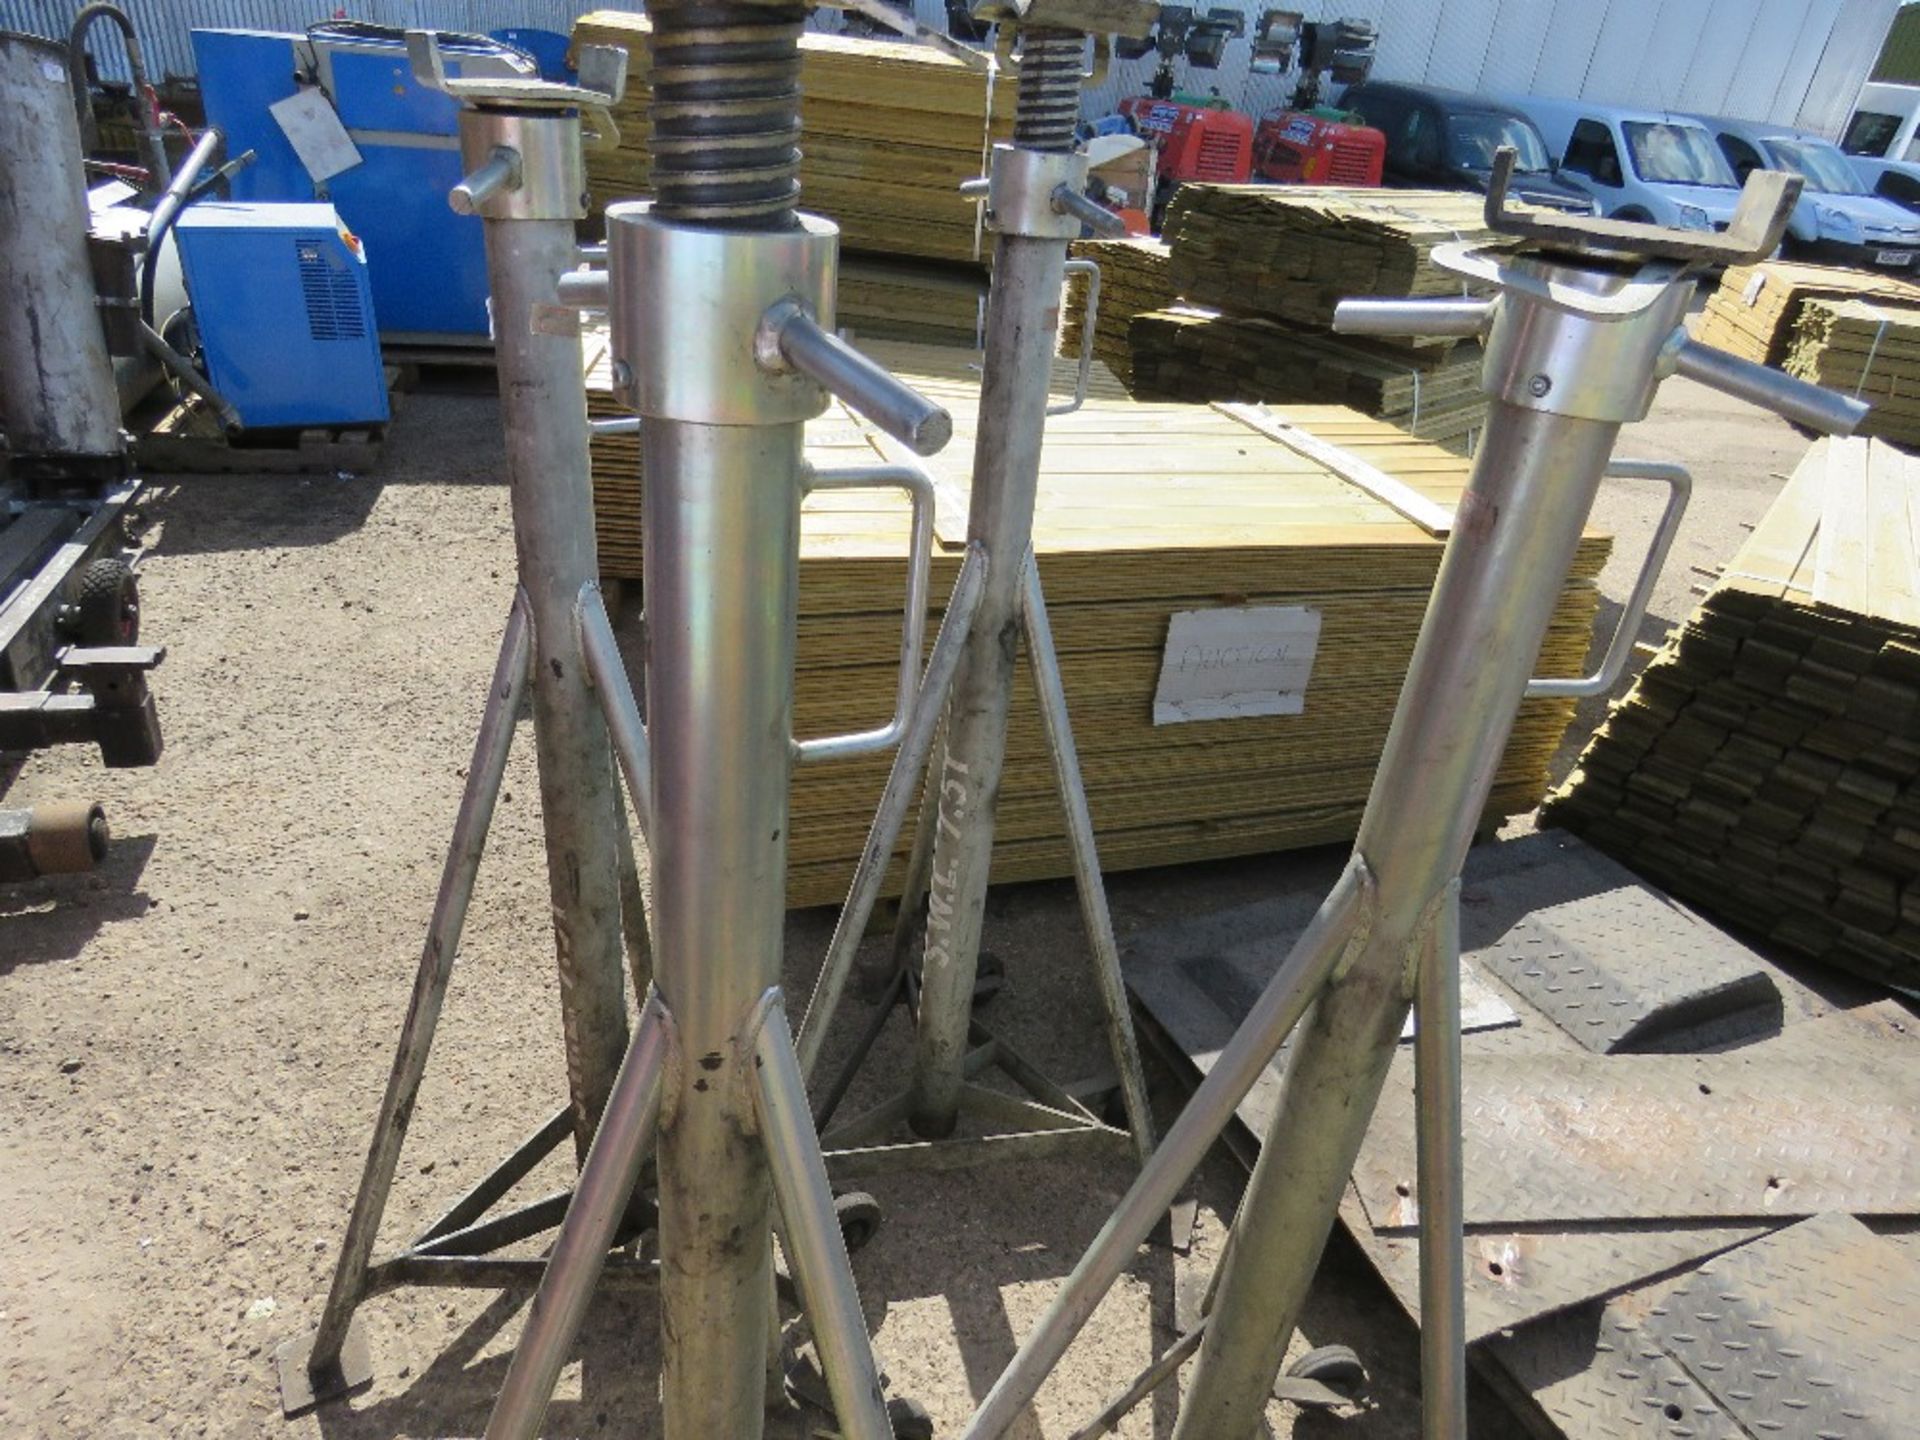 SET OF 4 X SOMERS TOTAL KARE HIGH REACH 7.5TONNE RATED AXLE SUPPORT STANDS, EX COMPANY LIQUIDATION - Image 3 of 3